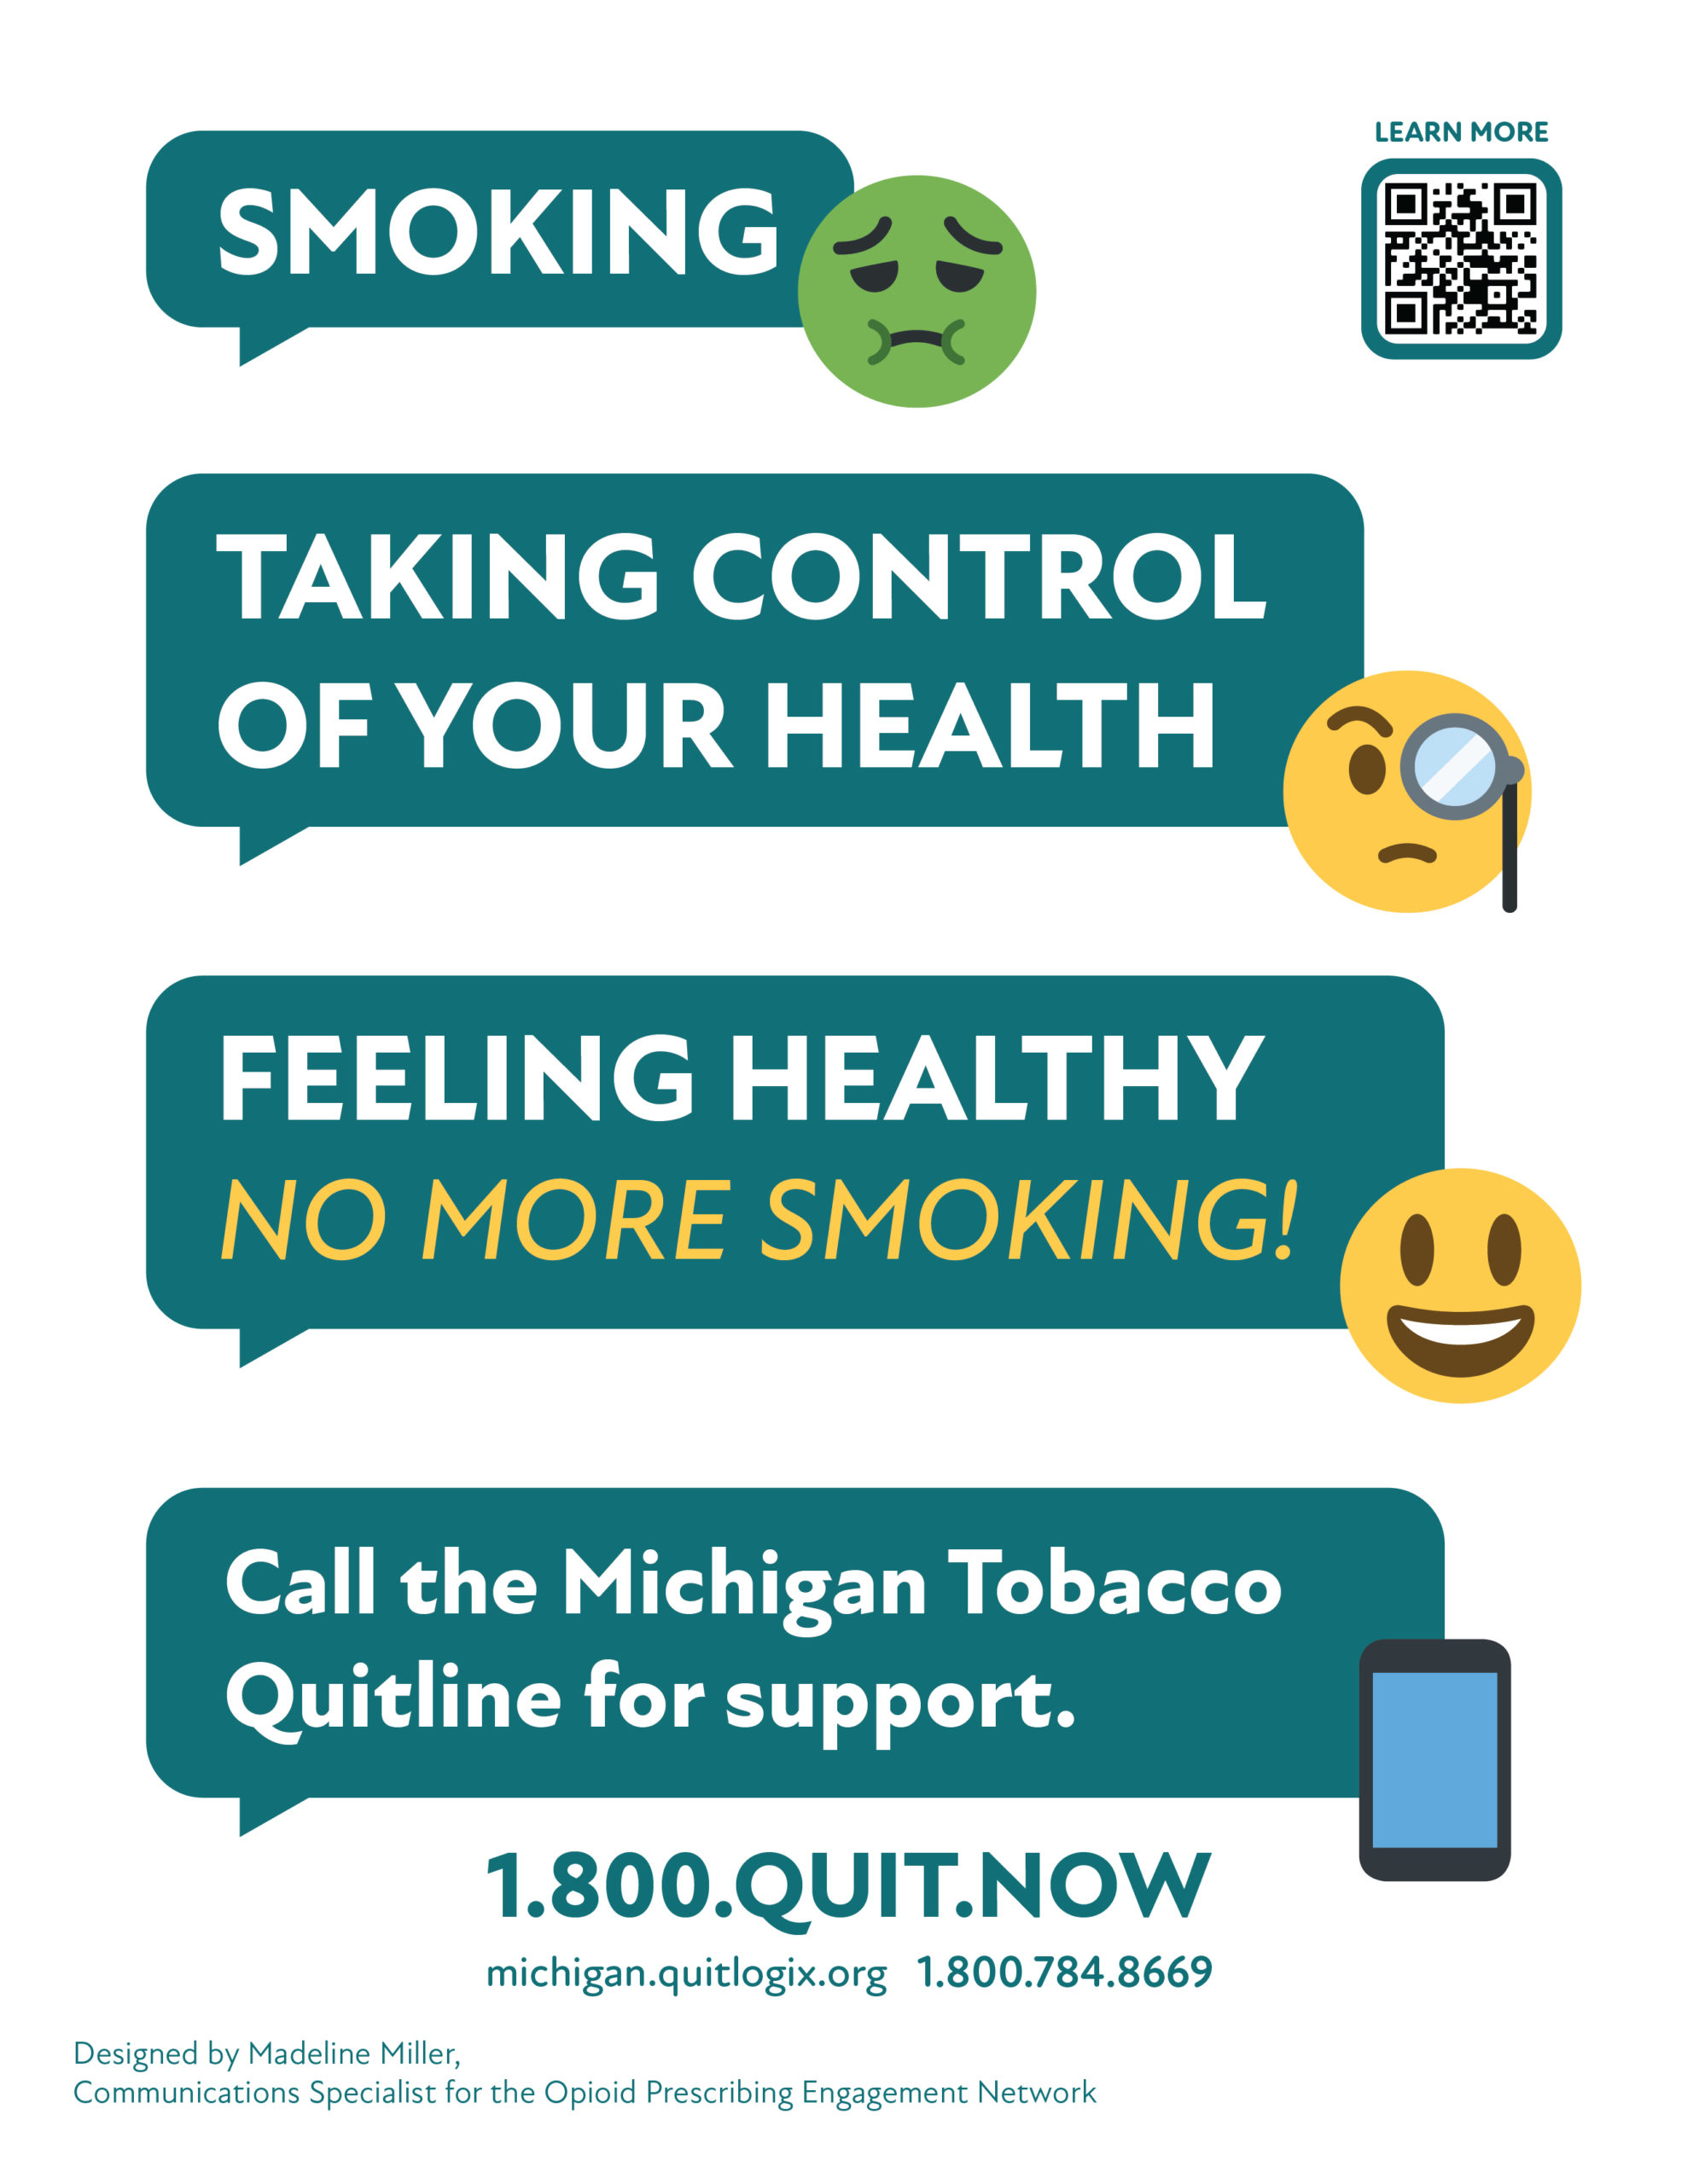 Quit Smoking poster featuring emojis and text message bubbles that read Smoking-Sick Face Emoji, Taking control of your health -inspector emoji, feeling healhty no more smoking! smiling emoji. Call the Michigan Tobacco Quitline for Support. 1 800 Quit Now